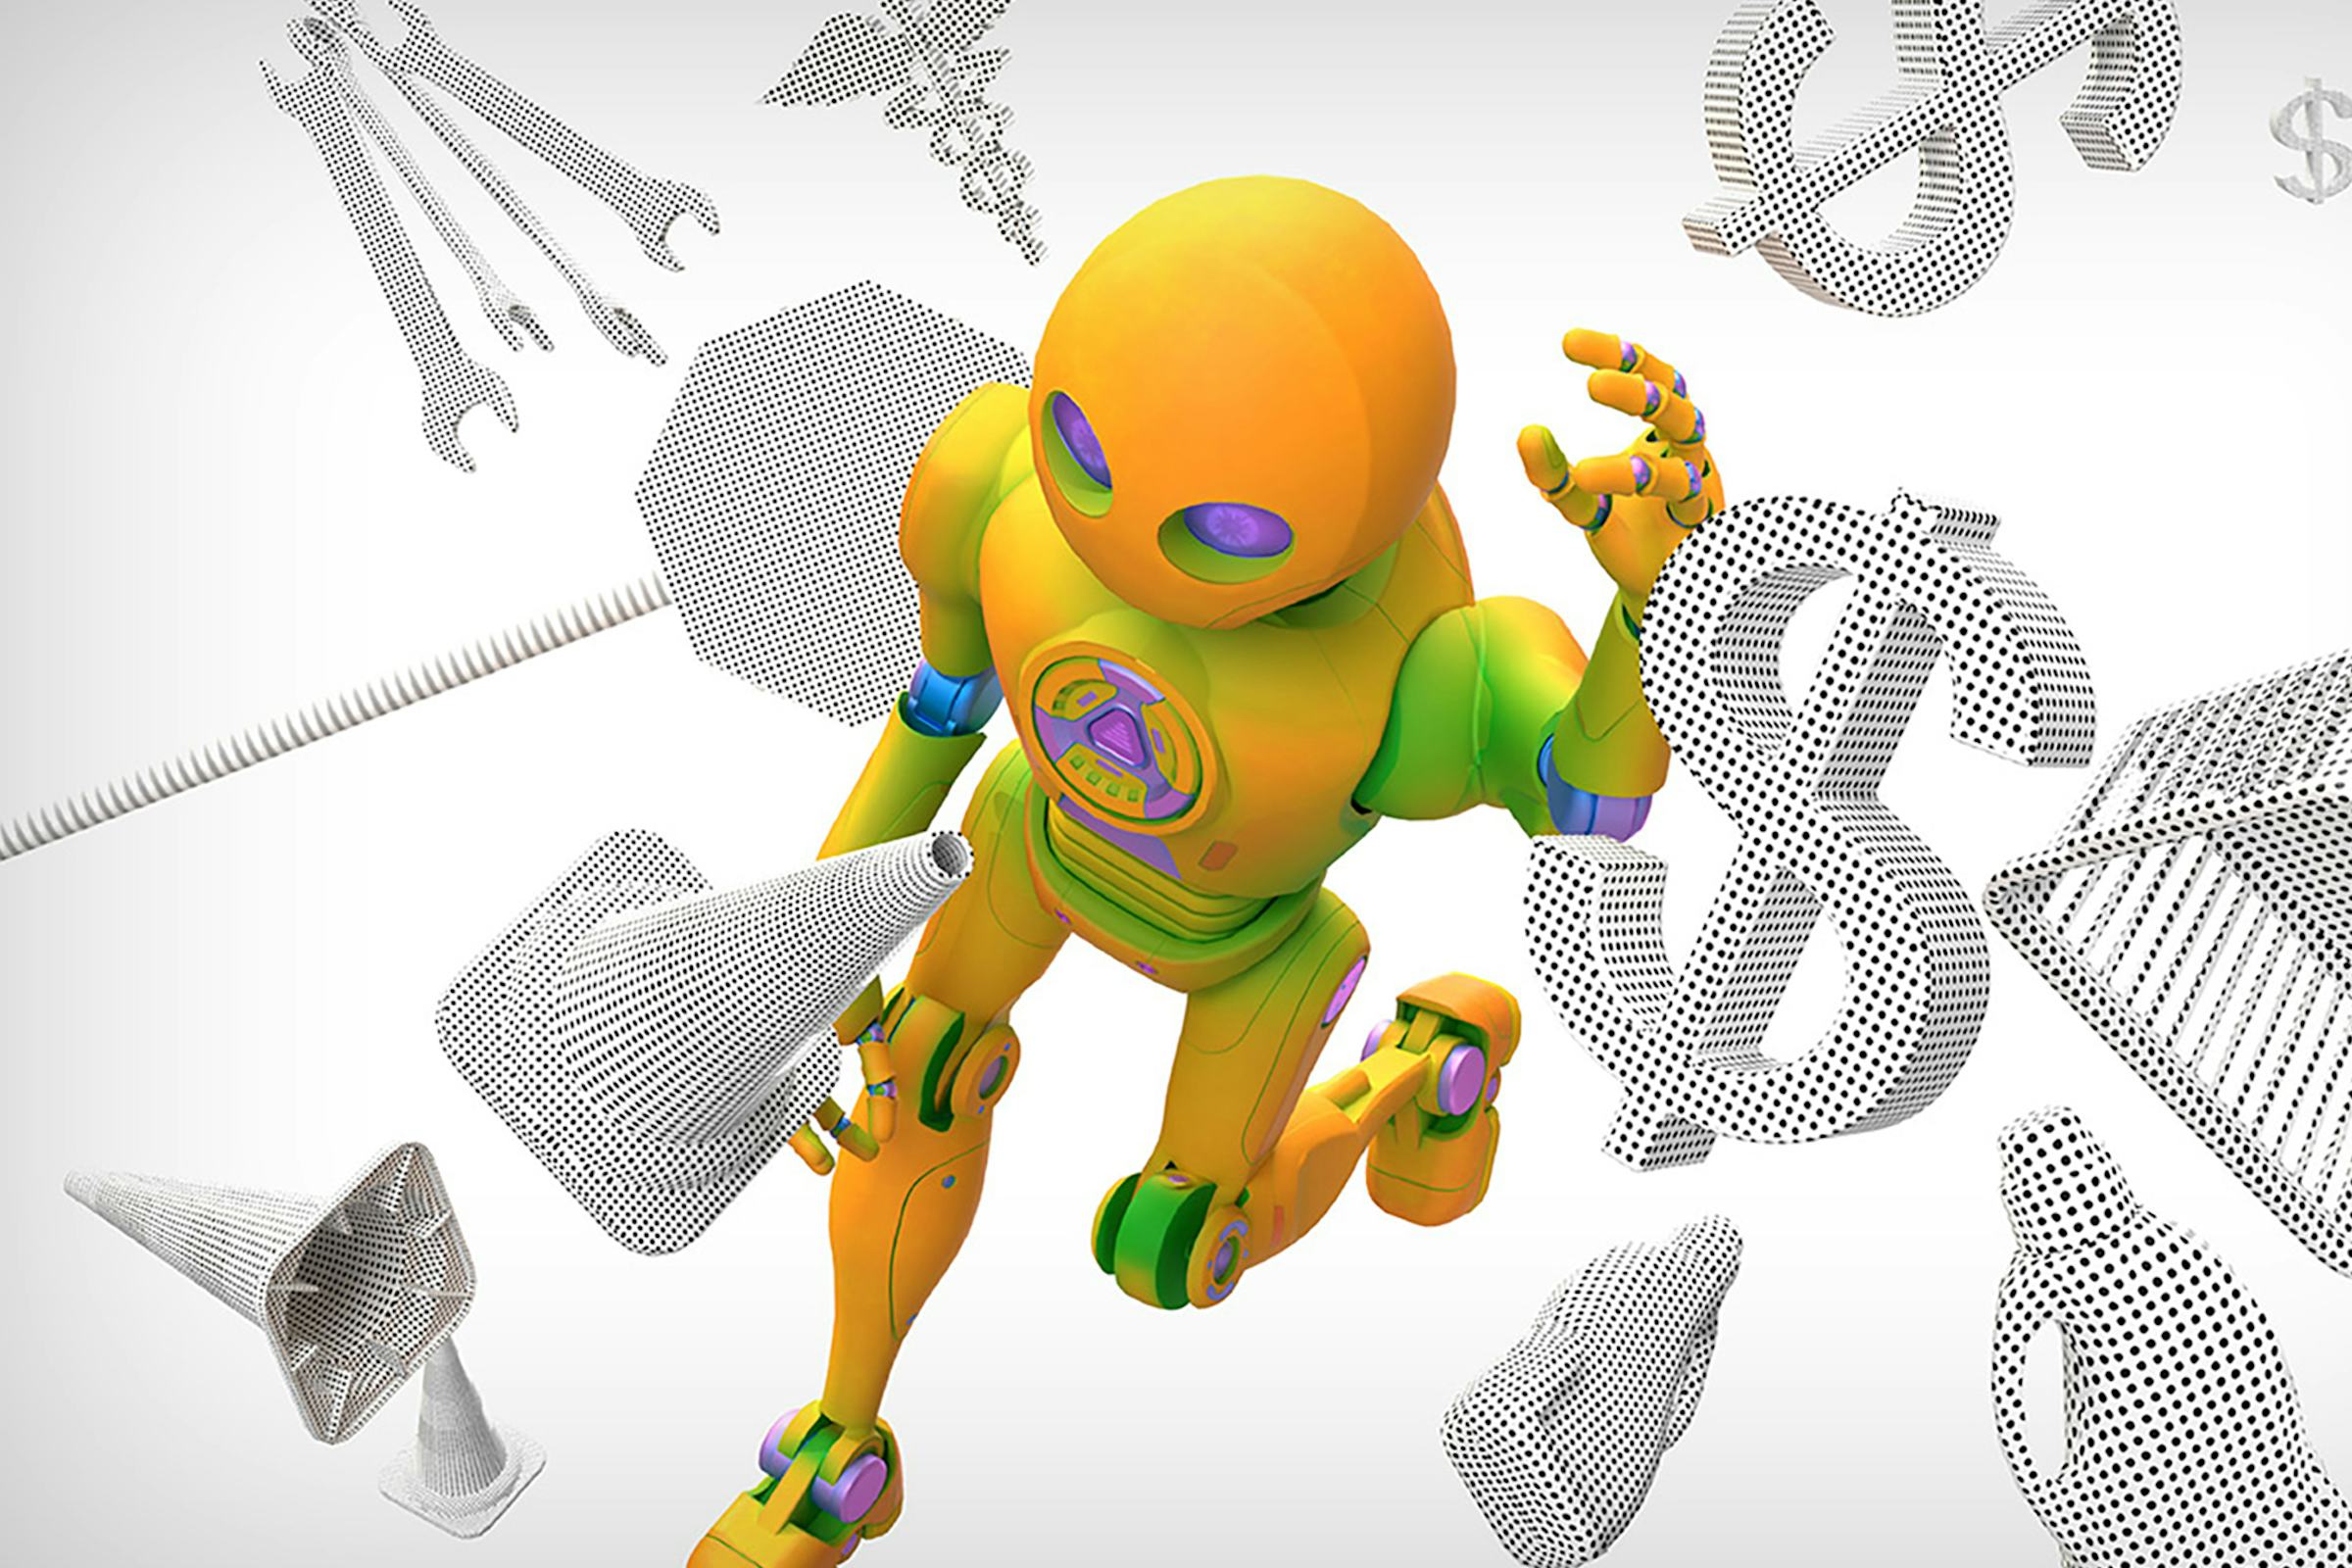 Illustration of a robot walking through a cloud of symbols for money, driving, housekeeping and health care float by